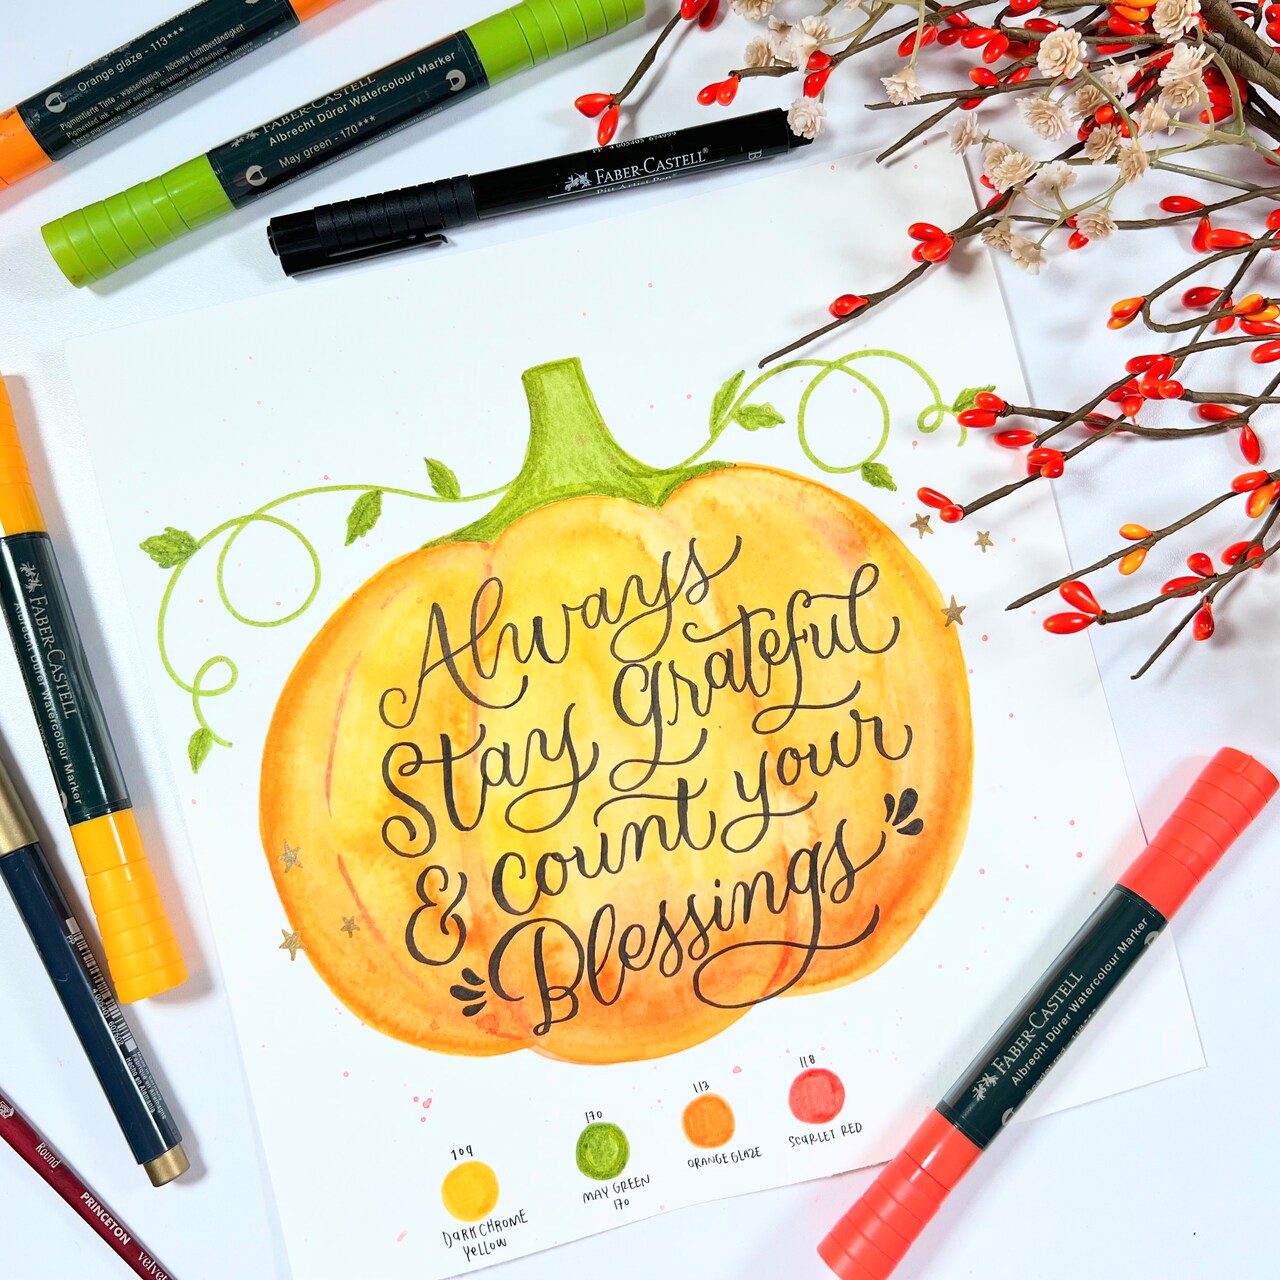 Watercolor Painting & Brush Lettering Masterclass with Faber-Castell's Albrecht Durer Watercolor Markers & Pitt Artist Pens